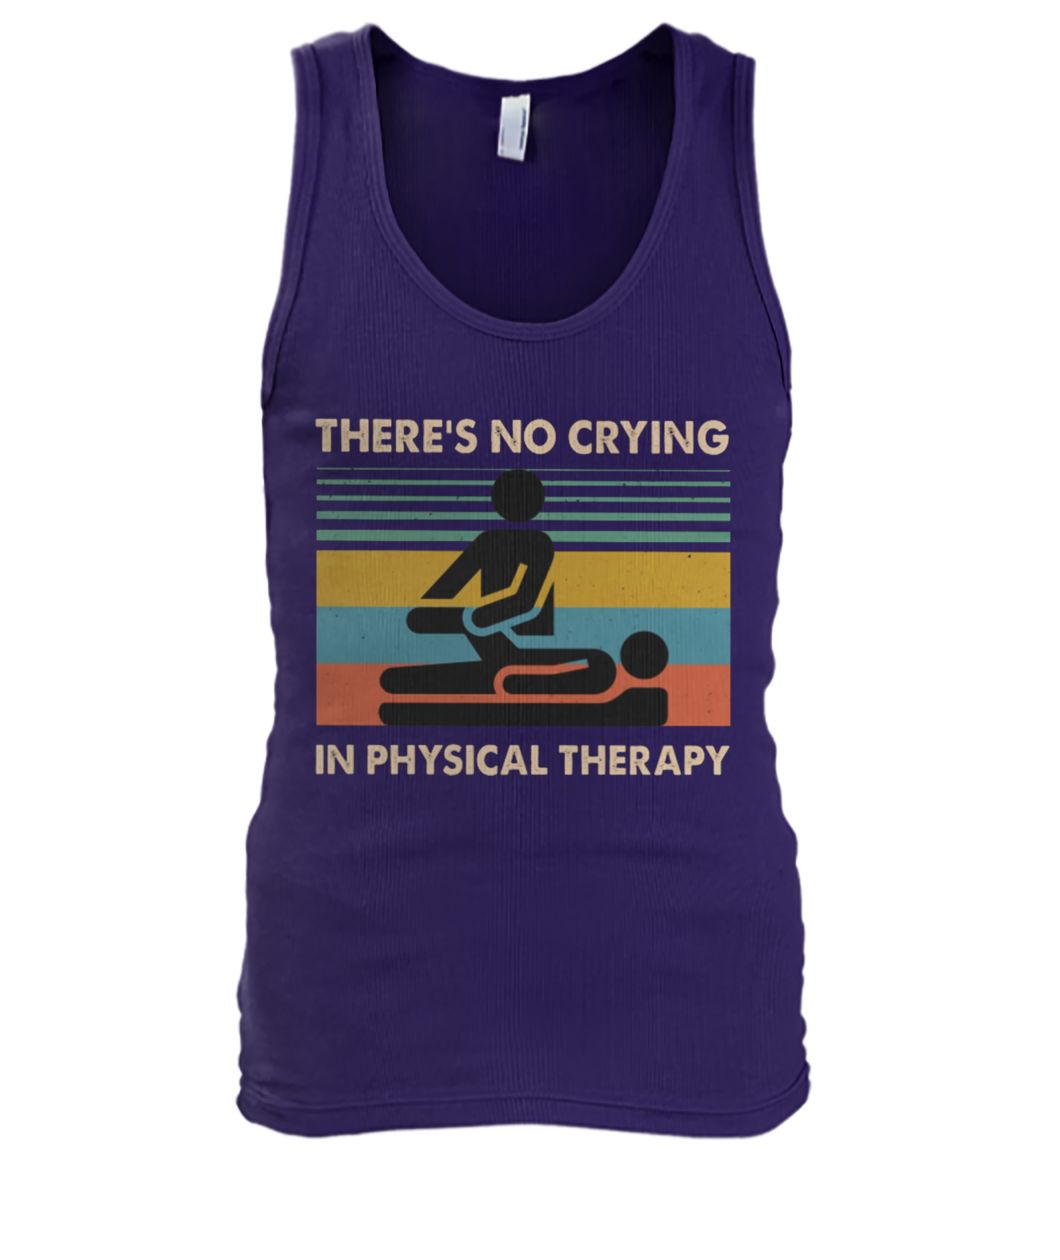 Vintage there's no crying in physical therapy men's tank top